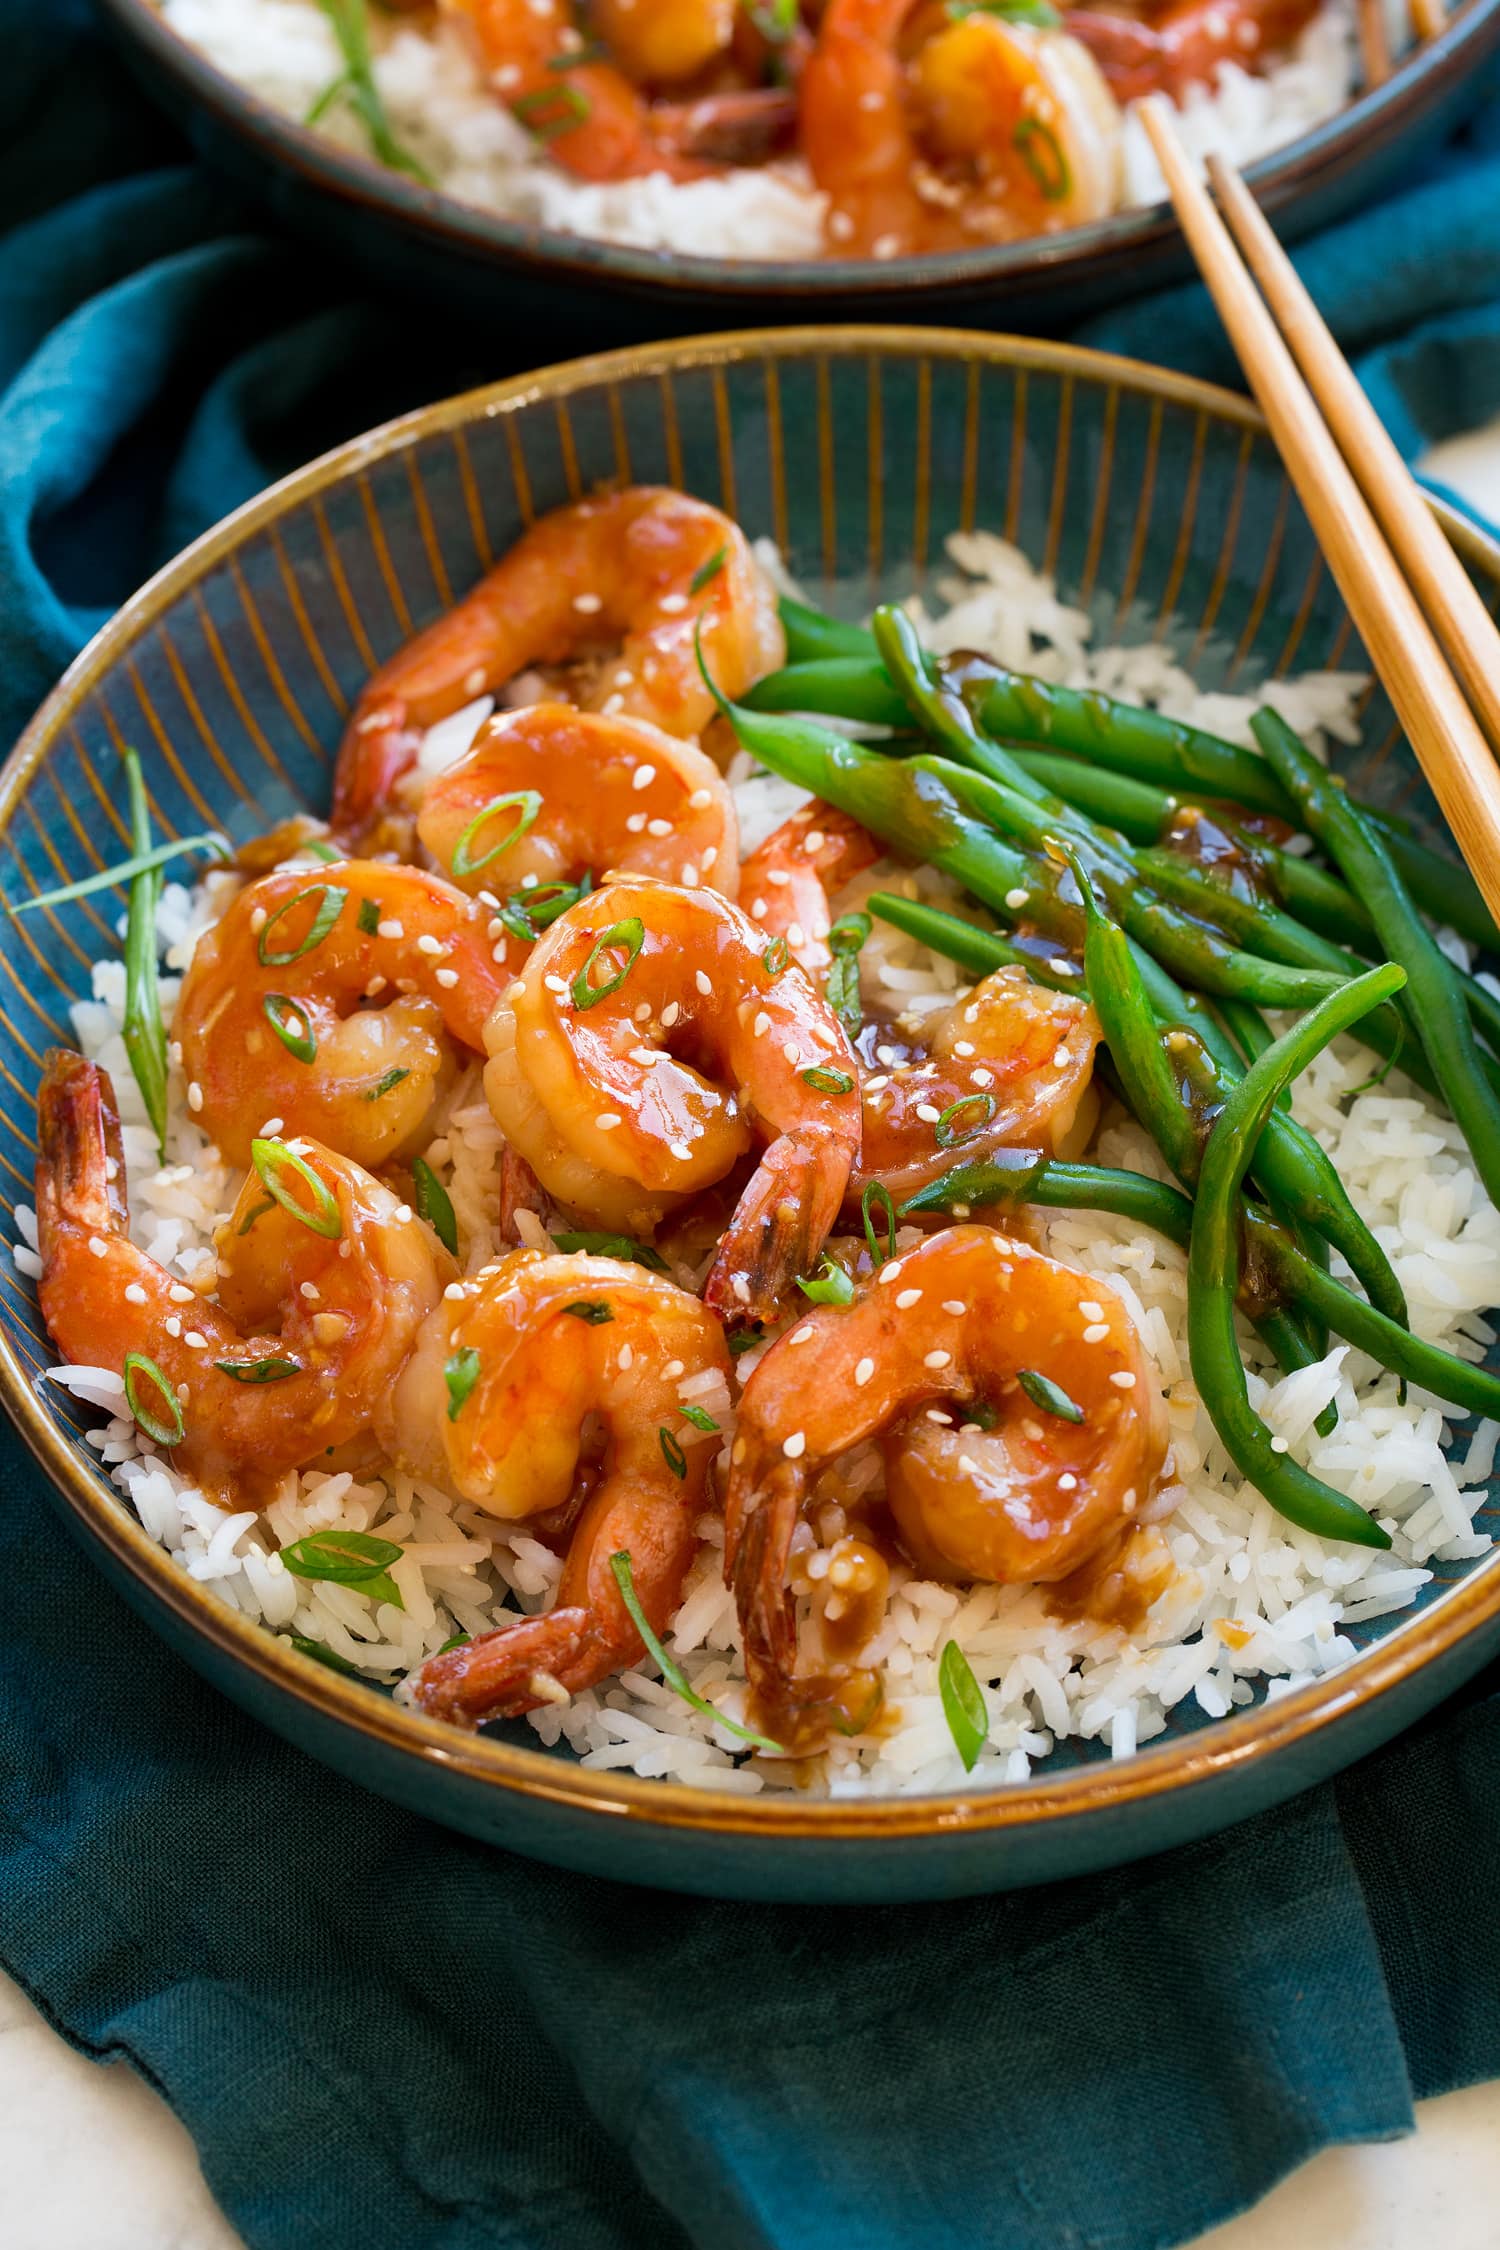 Teriyaki shrimp served with a side of steamed rice and green beans.